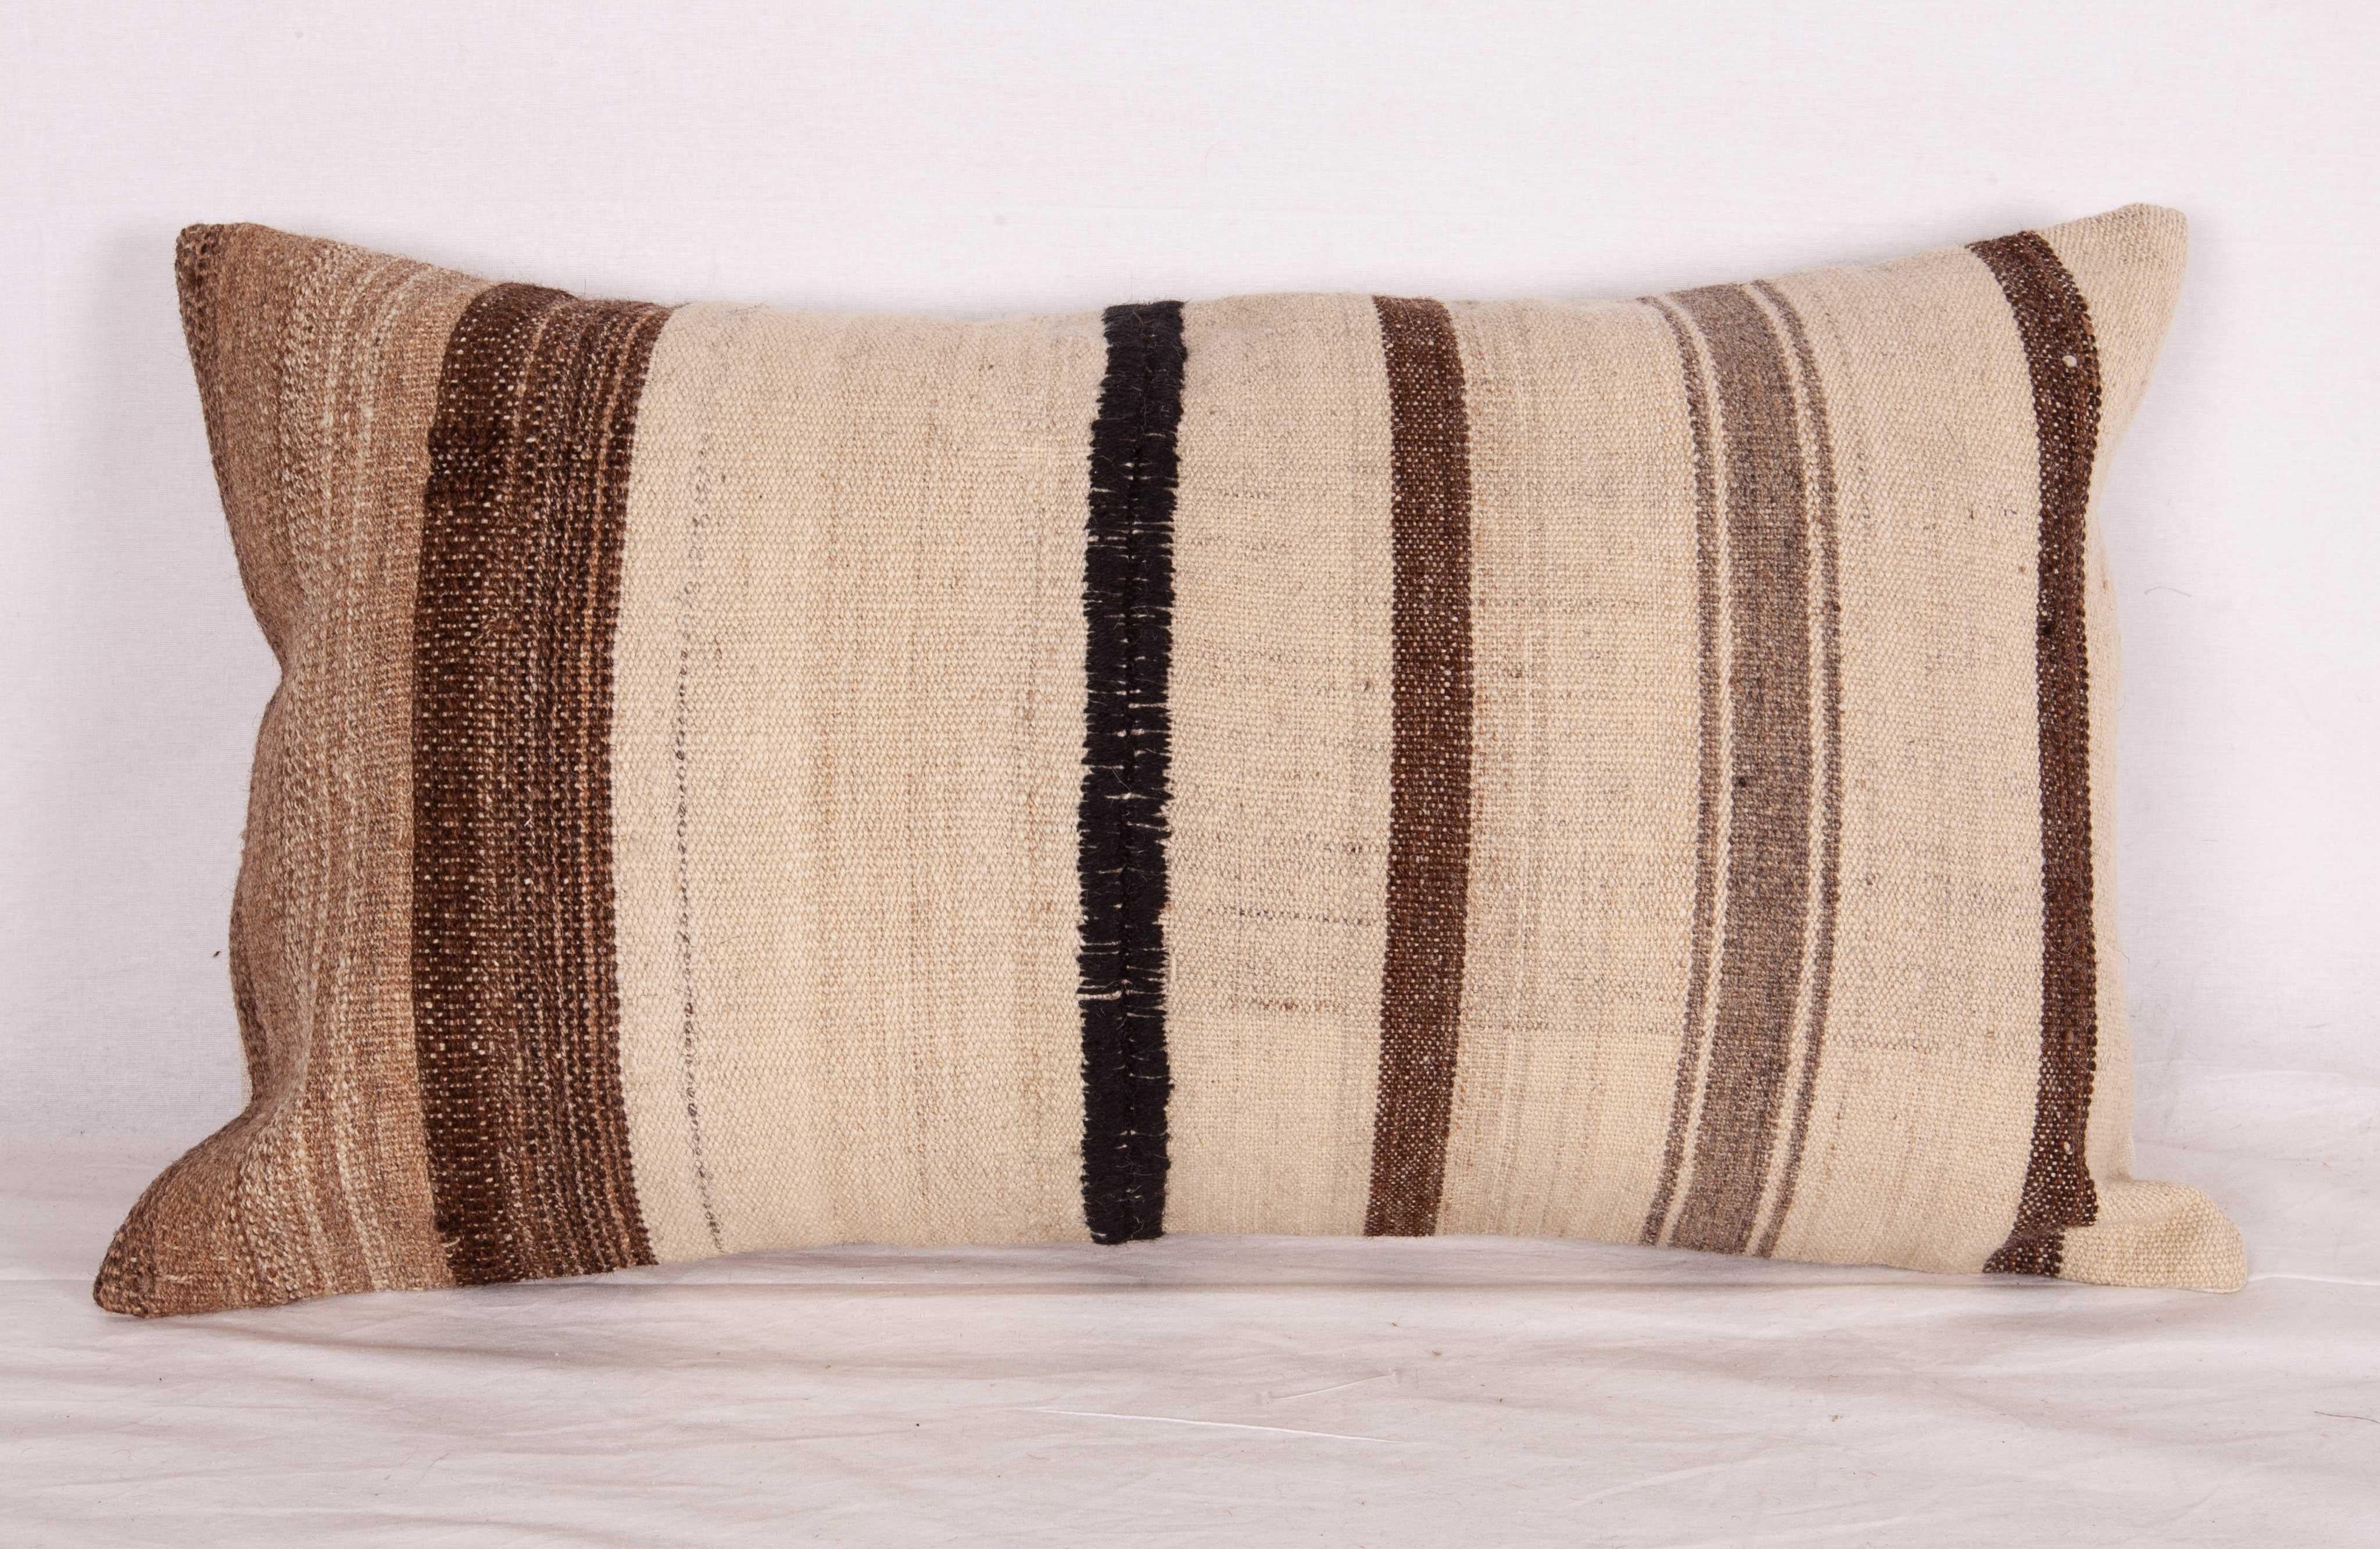 Turkish Kilim Pillow Cases Fashioned from a Vintage Neutral Kilim, Mid-20th Century